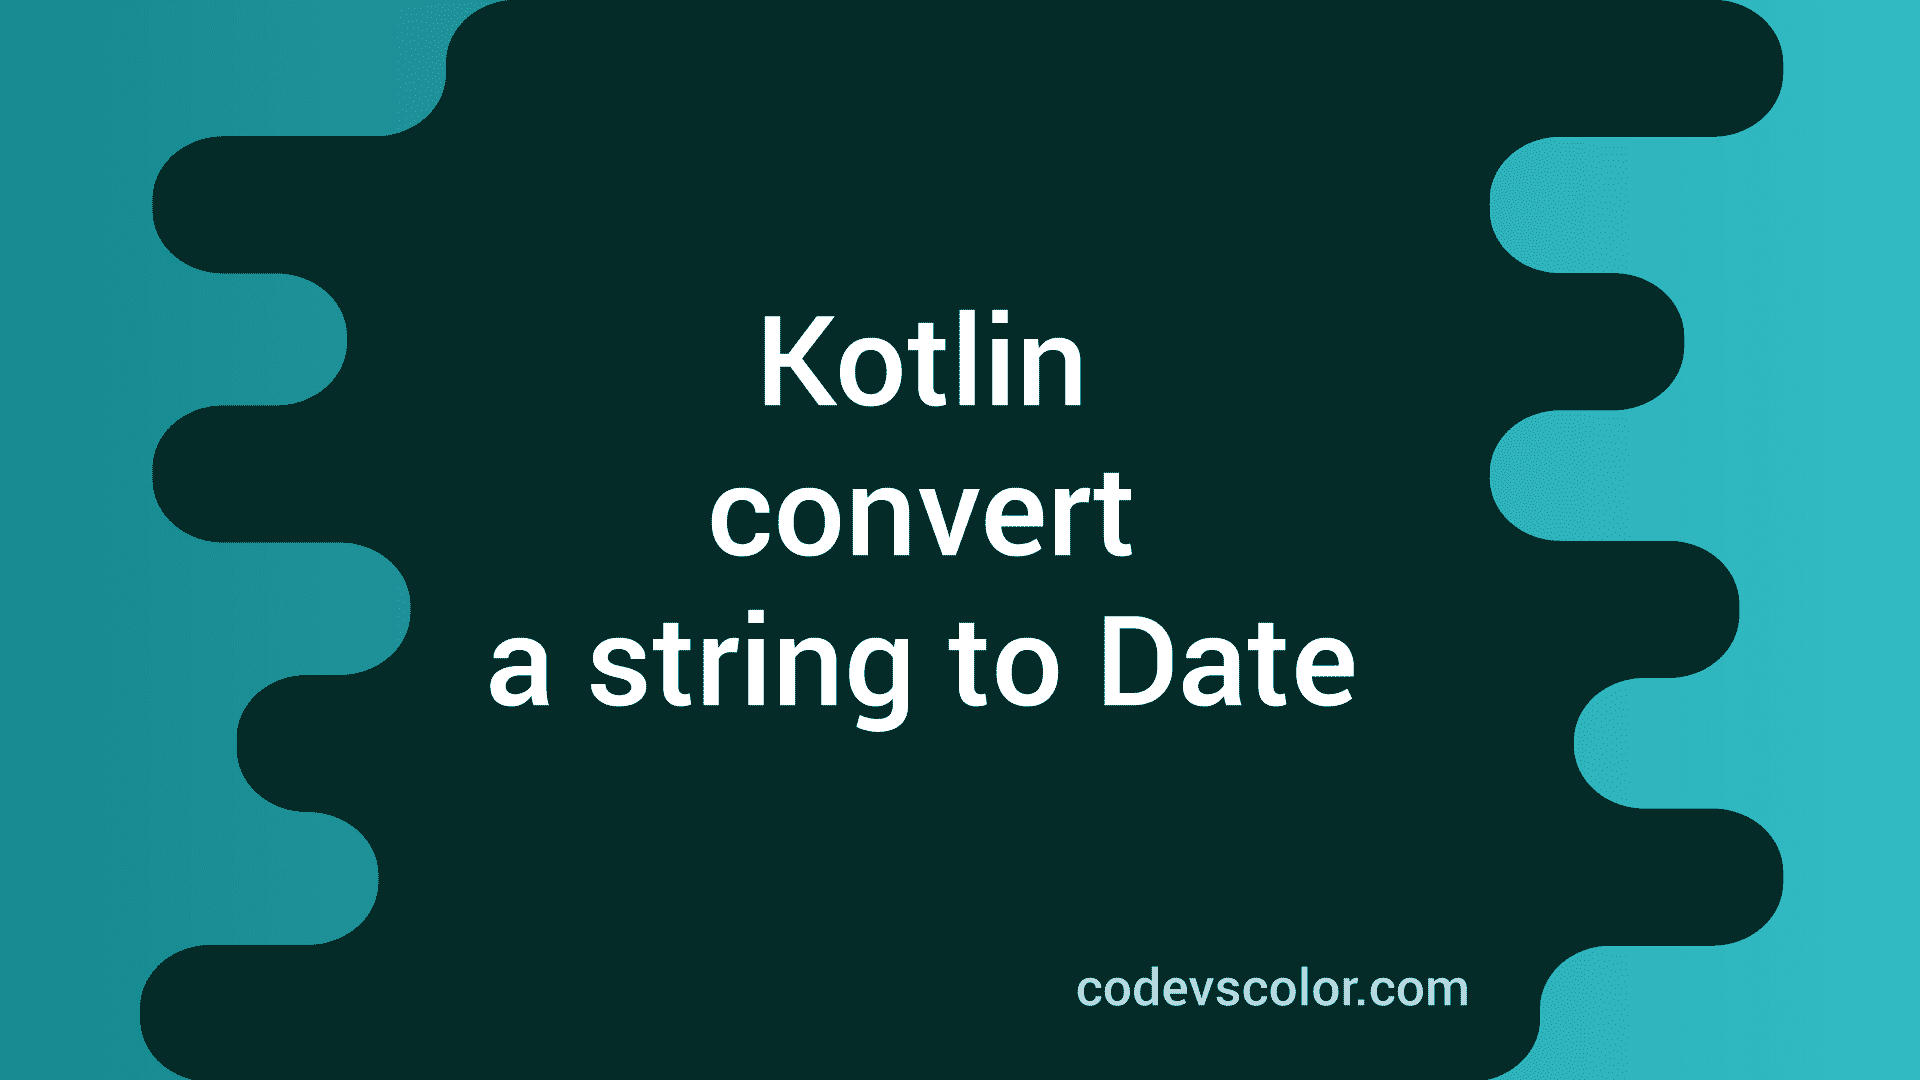 How to convert a string to Date in Kotlin CodeVsColor